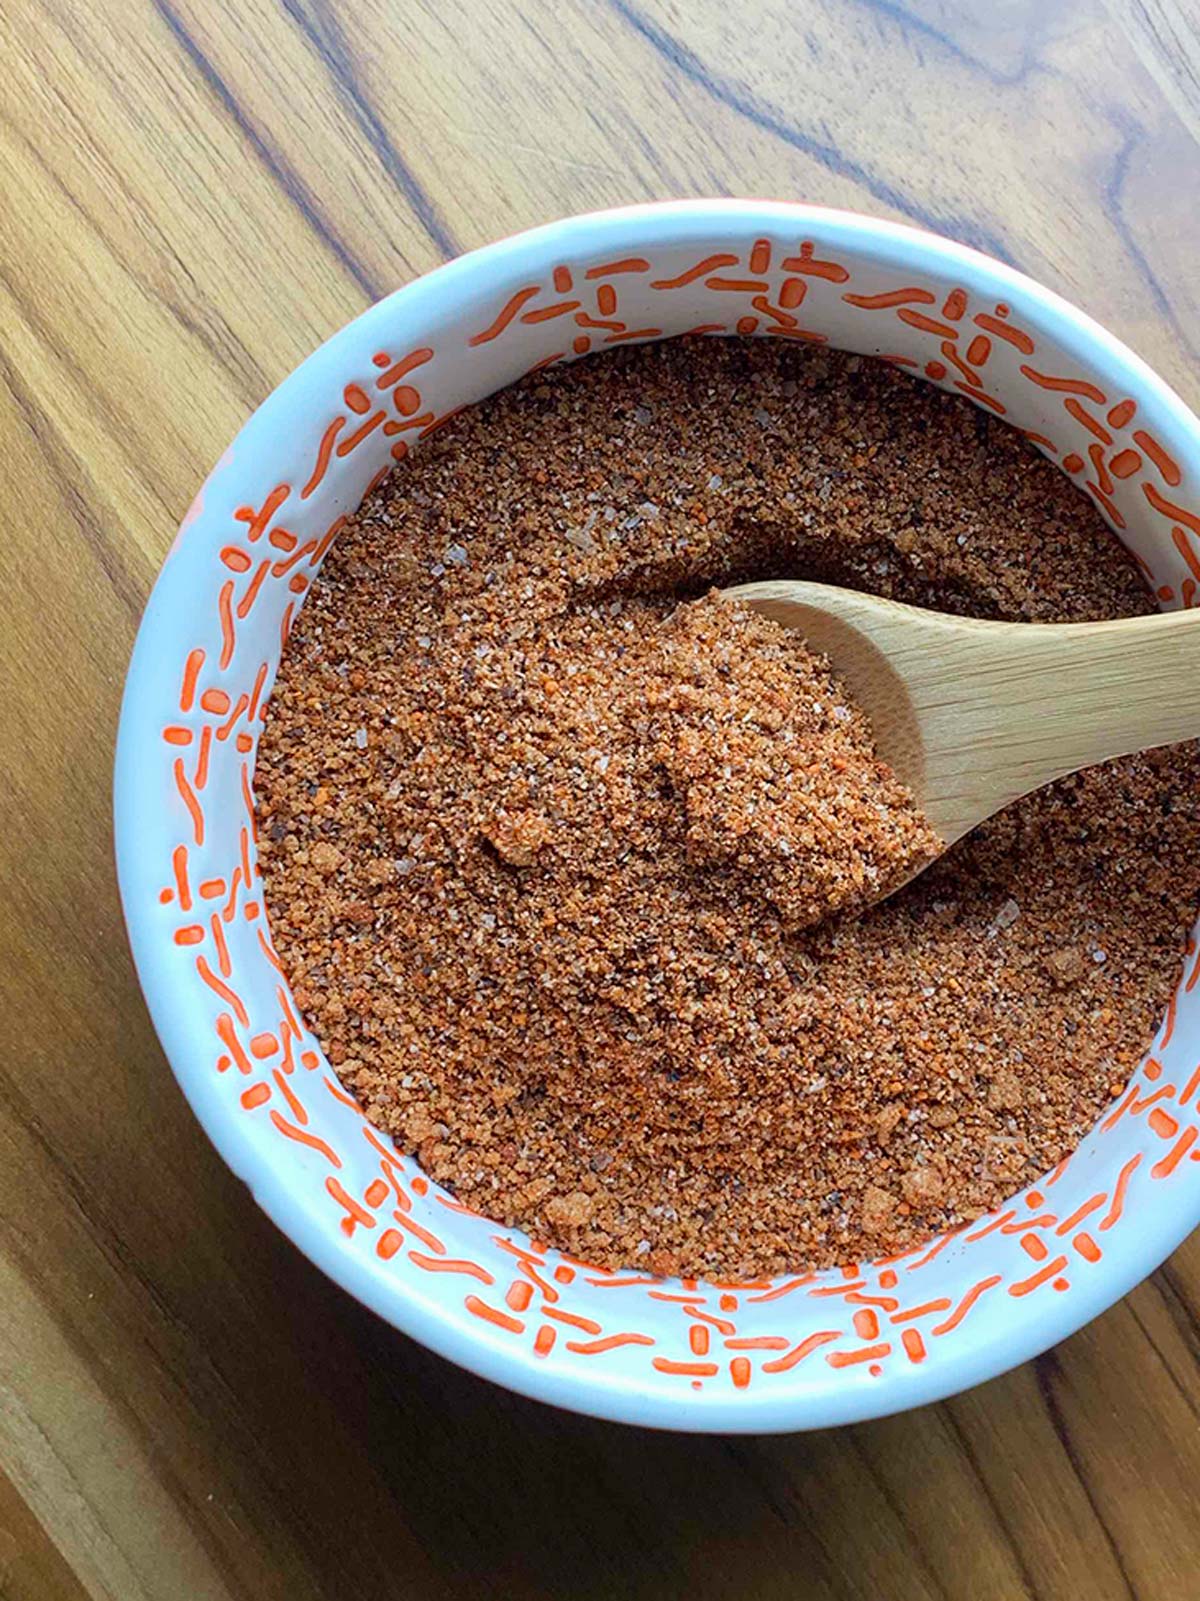 Dry spice rub in orange bowl with a wooden spoon.